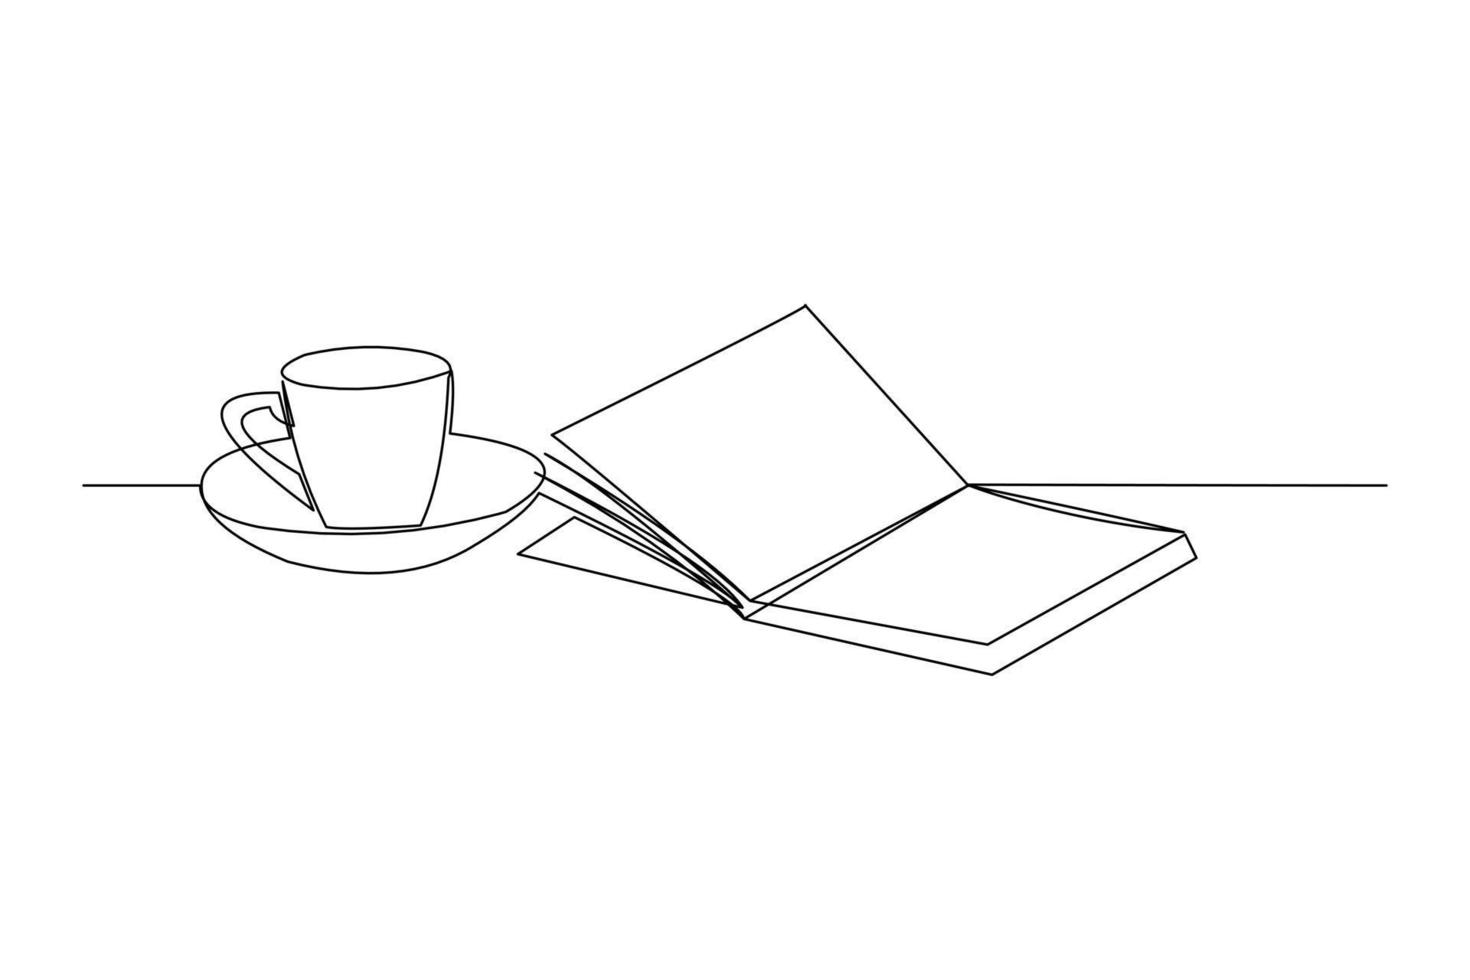 Continuous line drawing of an open book beside a cup of coffee at work desk. Writing draft business concept. Modern single one line art draw design vector graphic illustration